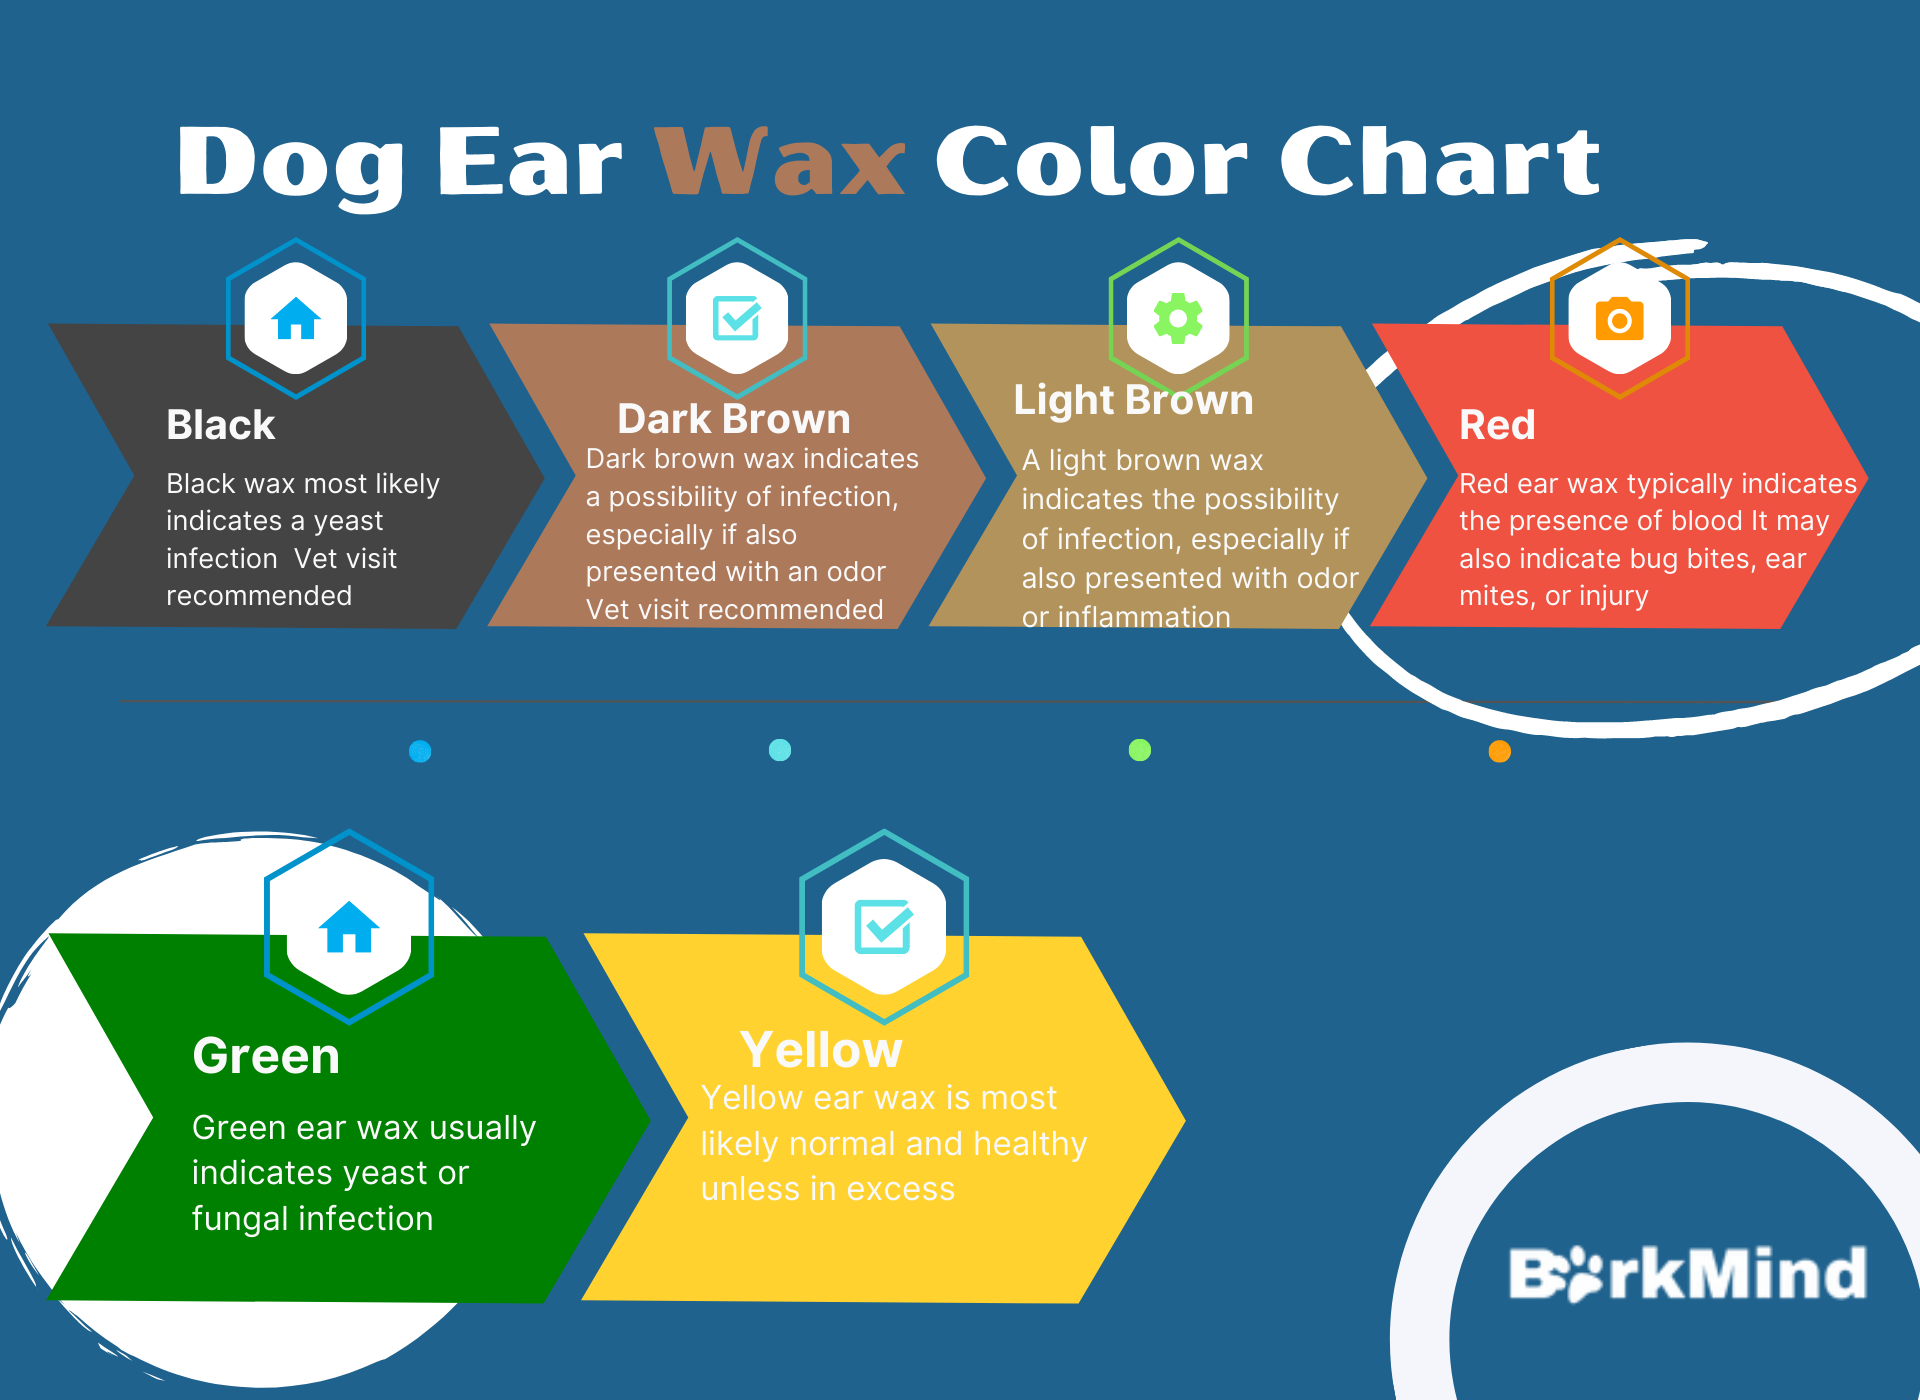 Dogs Ear Wax and Ears. What's the Deal?